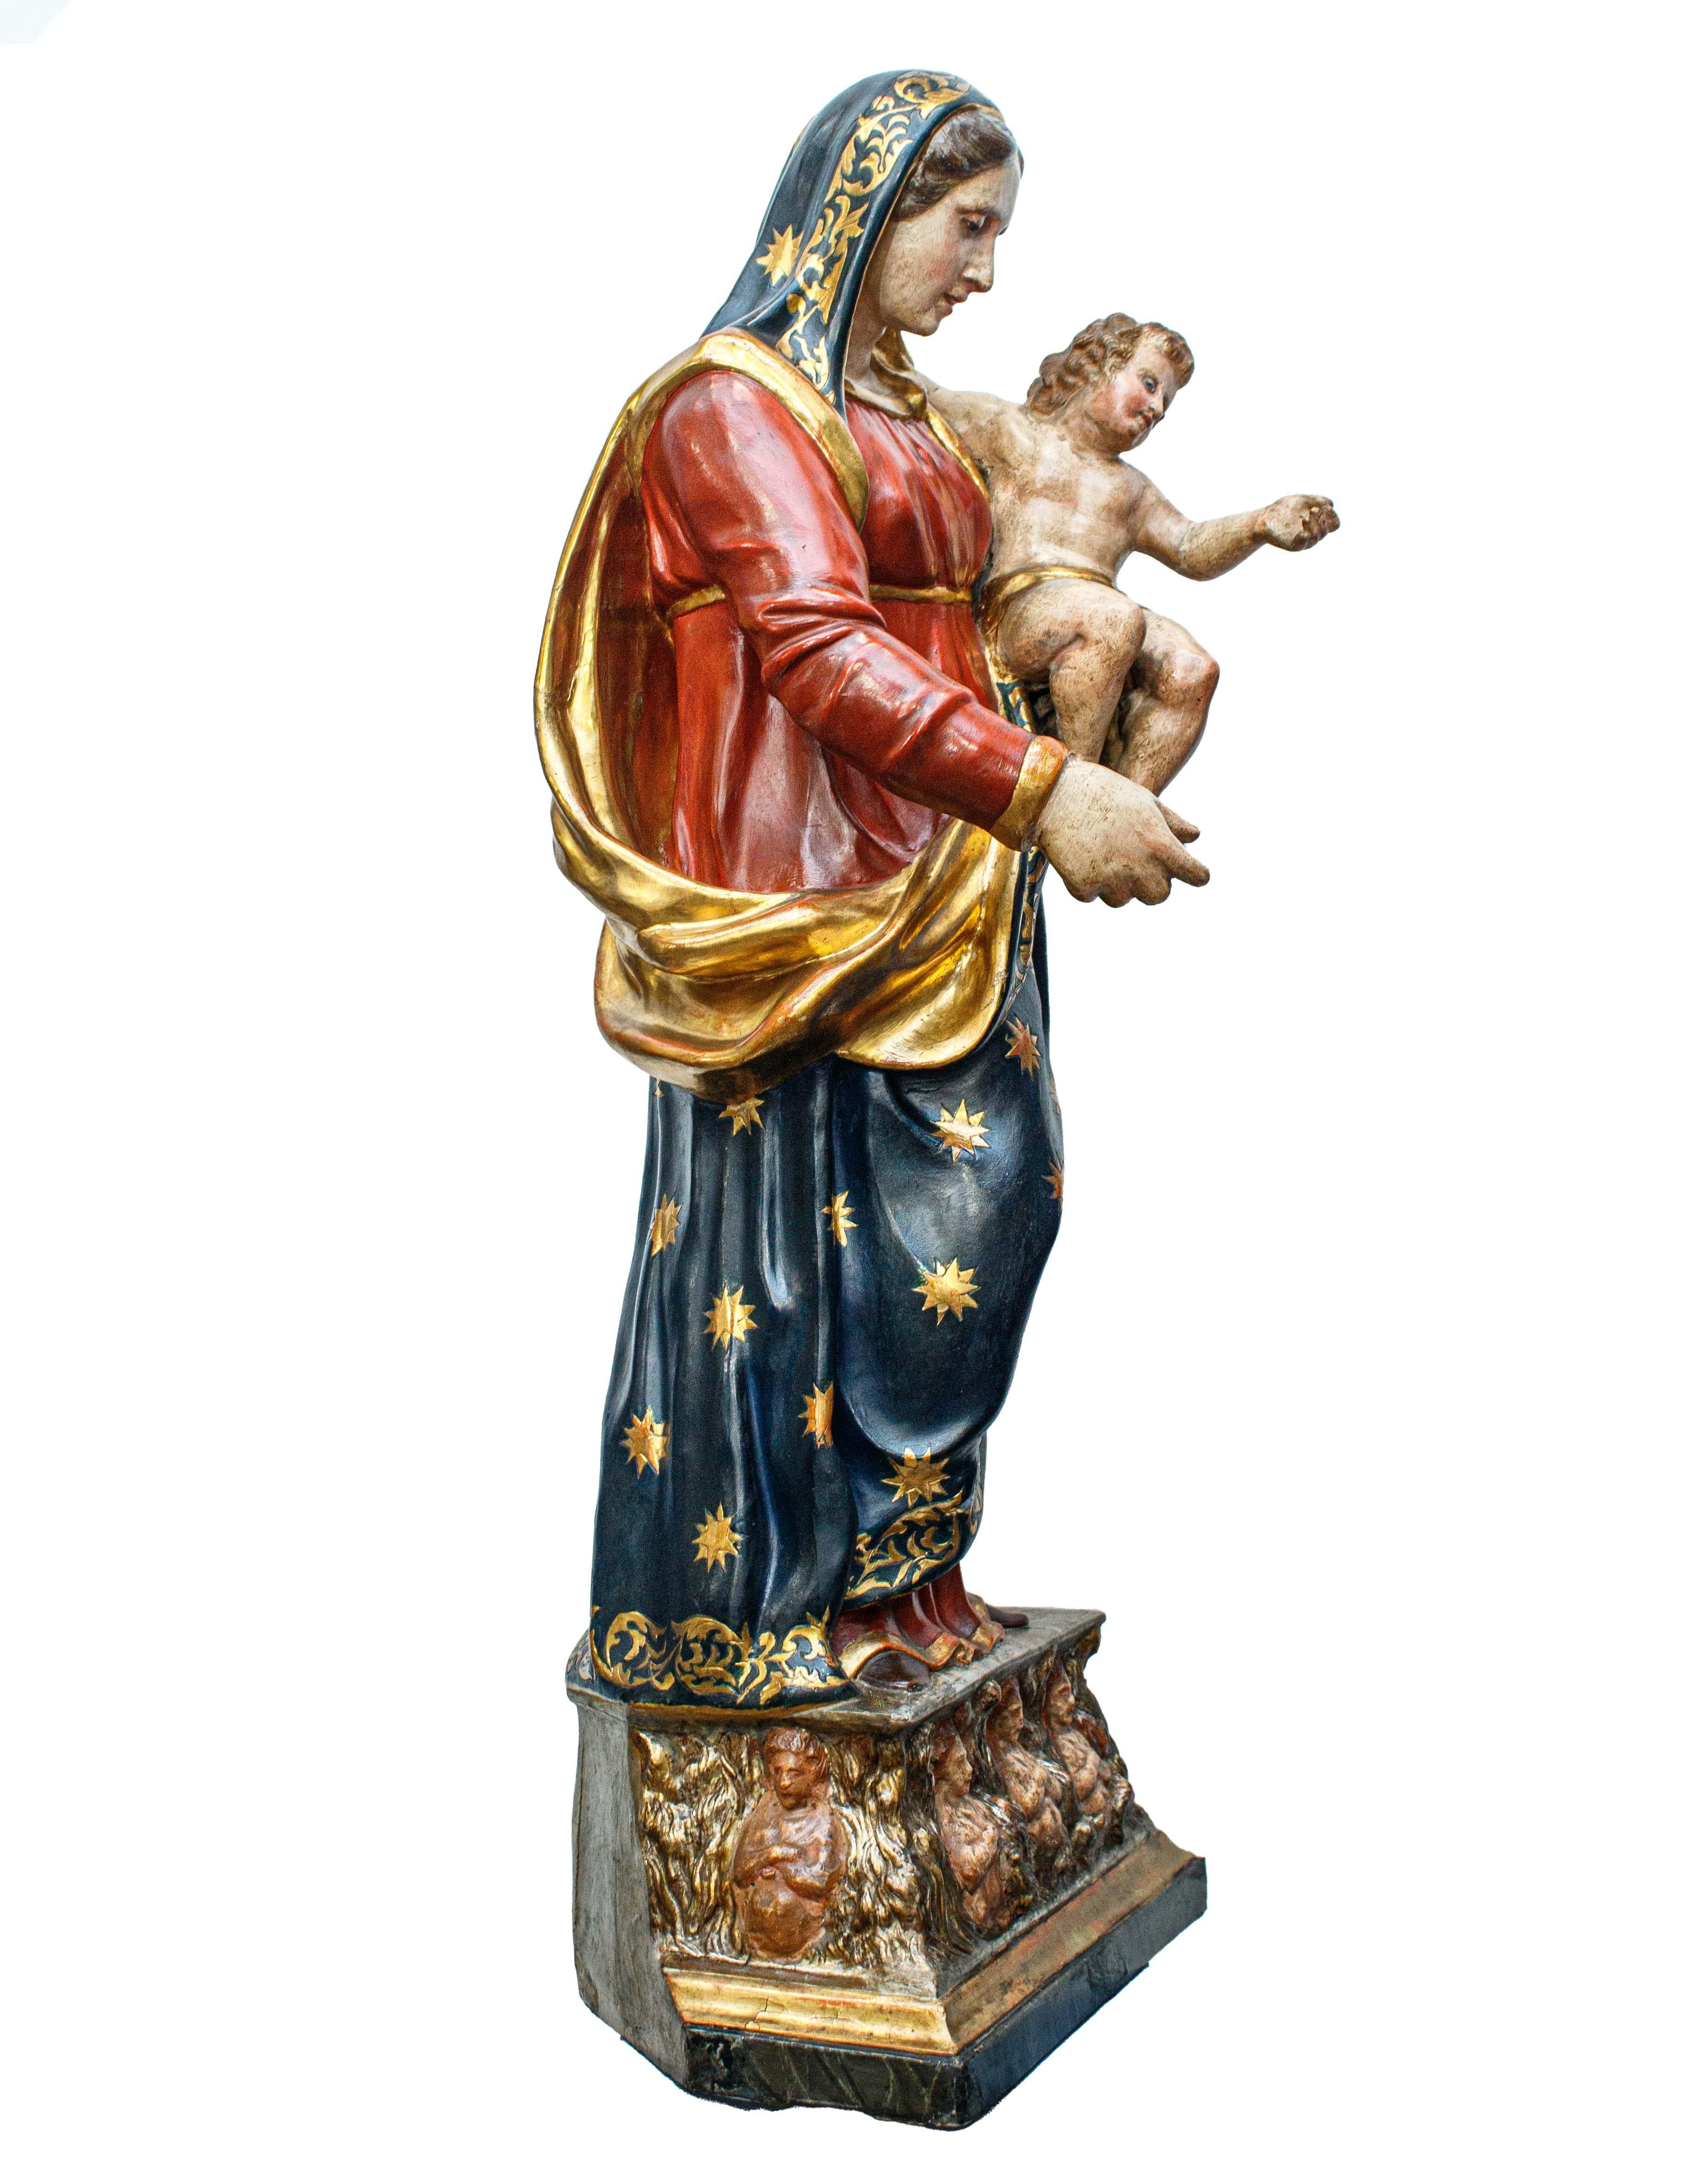 First half of the 19th century

Madonna and Child with souls in Purgatory 

Lacquered and gilded papier-mache with polychrome wooden base

cm 96.5 x 37.5 x 28

